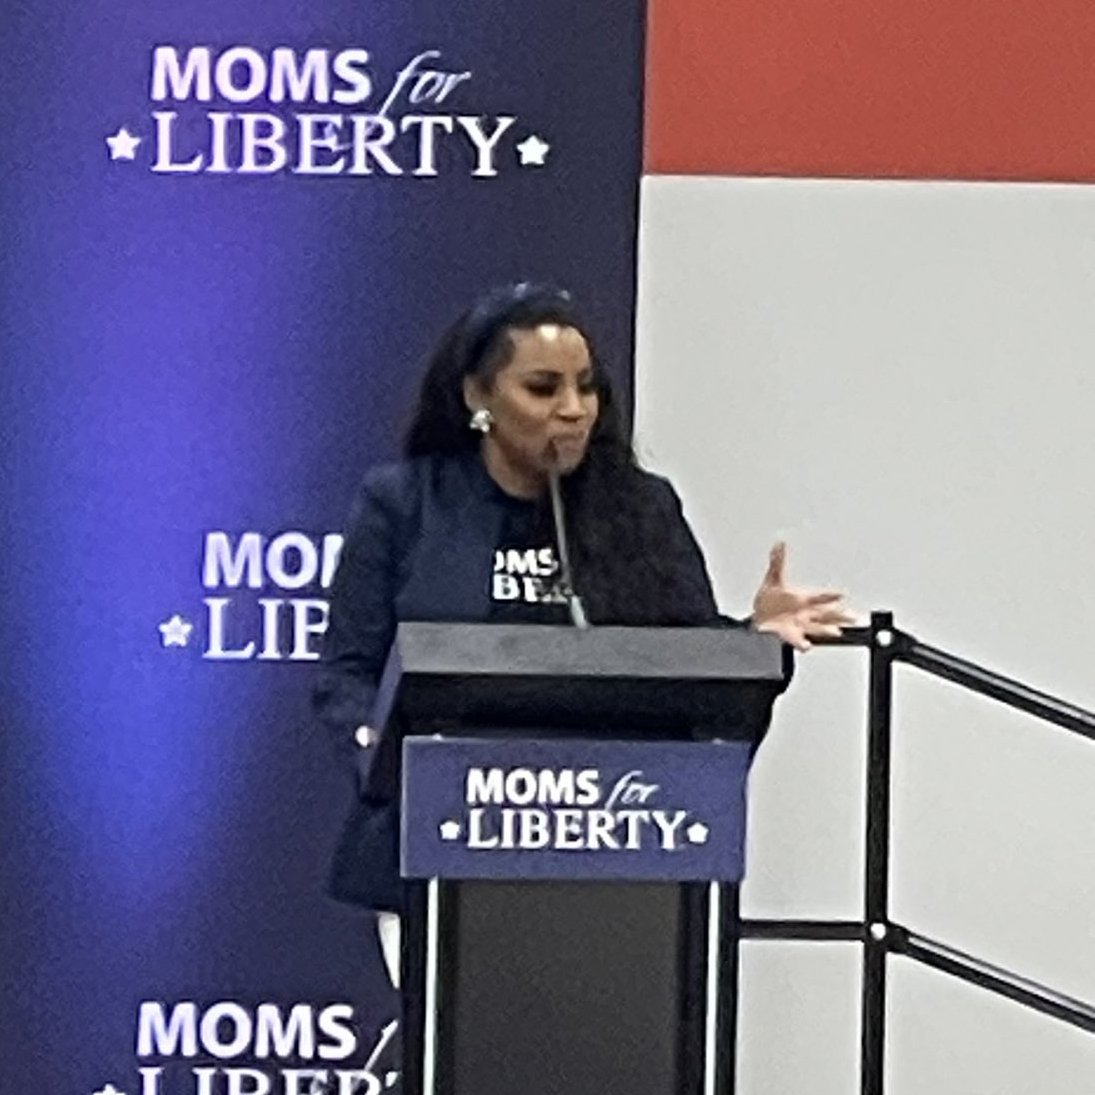 September 14, 2023, Featured speaker for the “Giving Parents A Voice” Townhall in Mesa, Arizona - launch of Moms for Liberty and the parental rights movement in the state of Arizona.